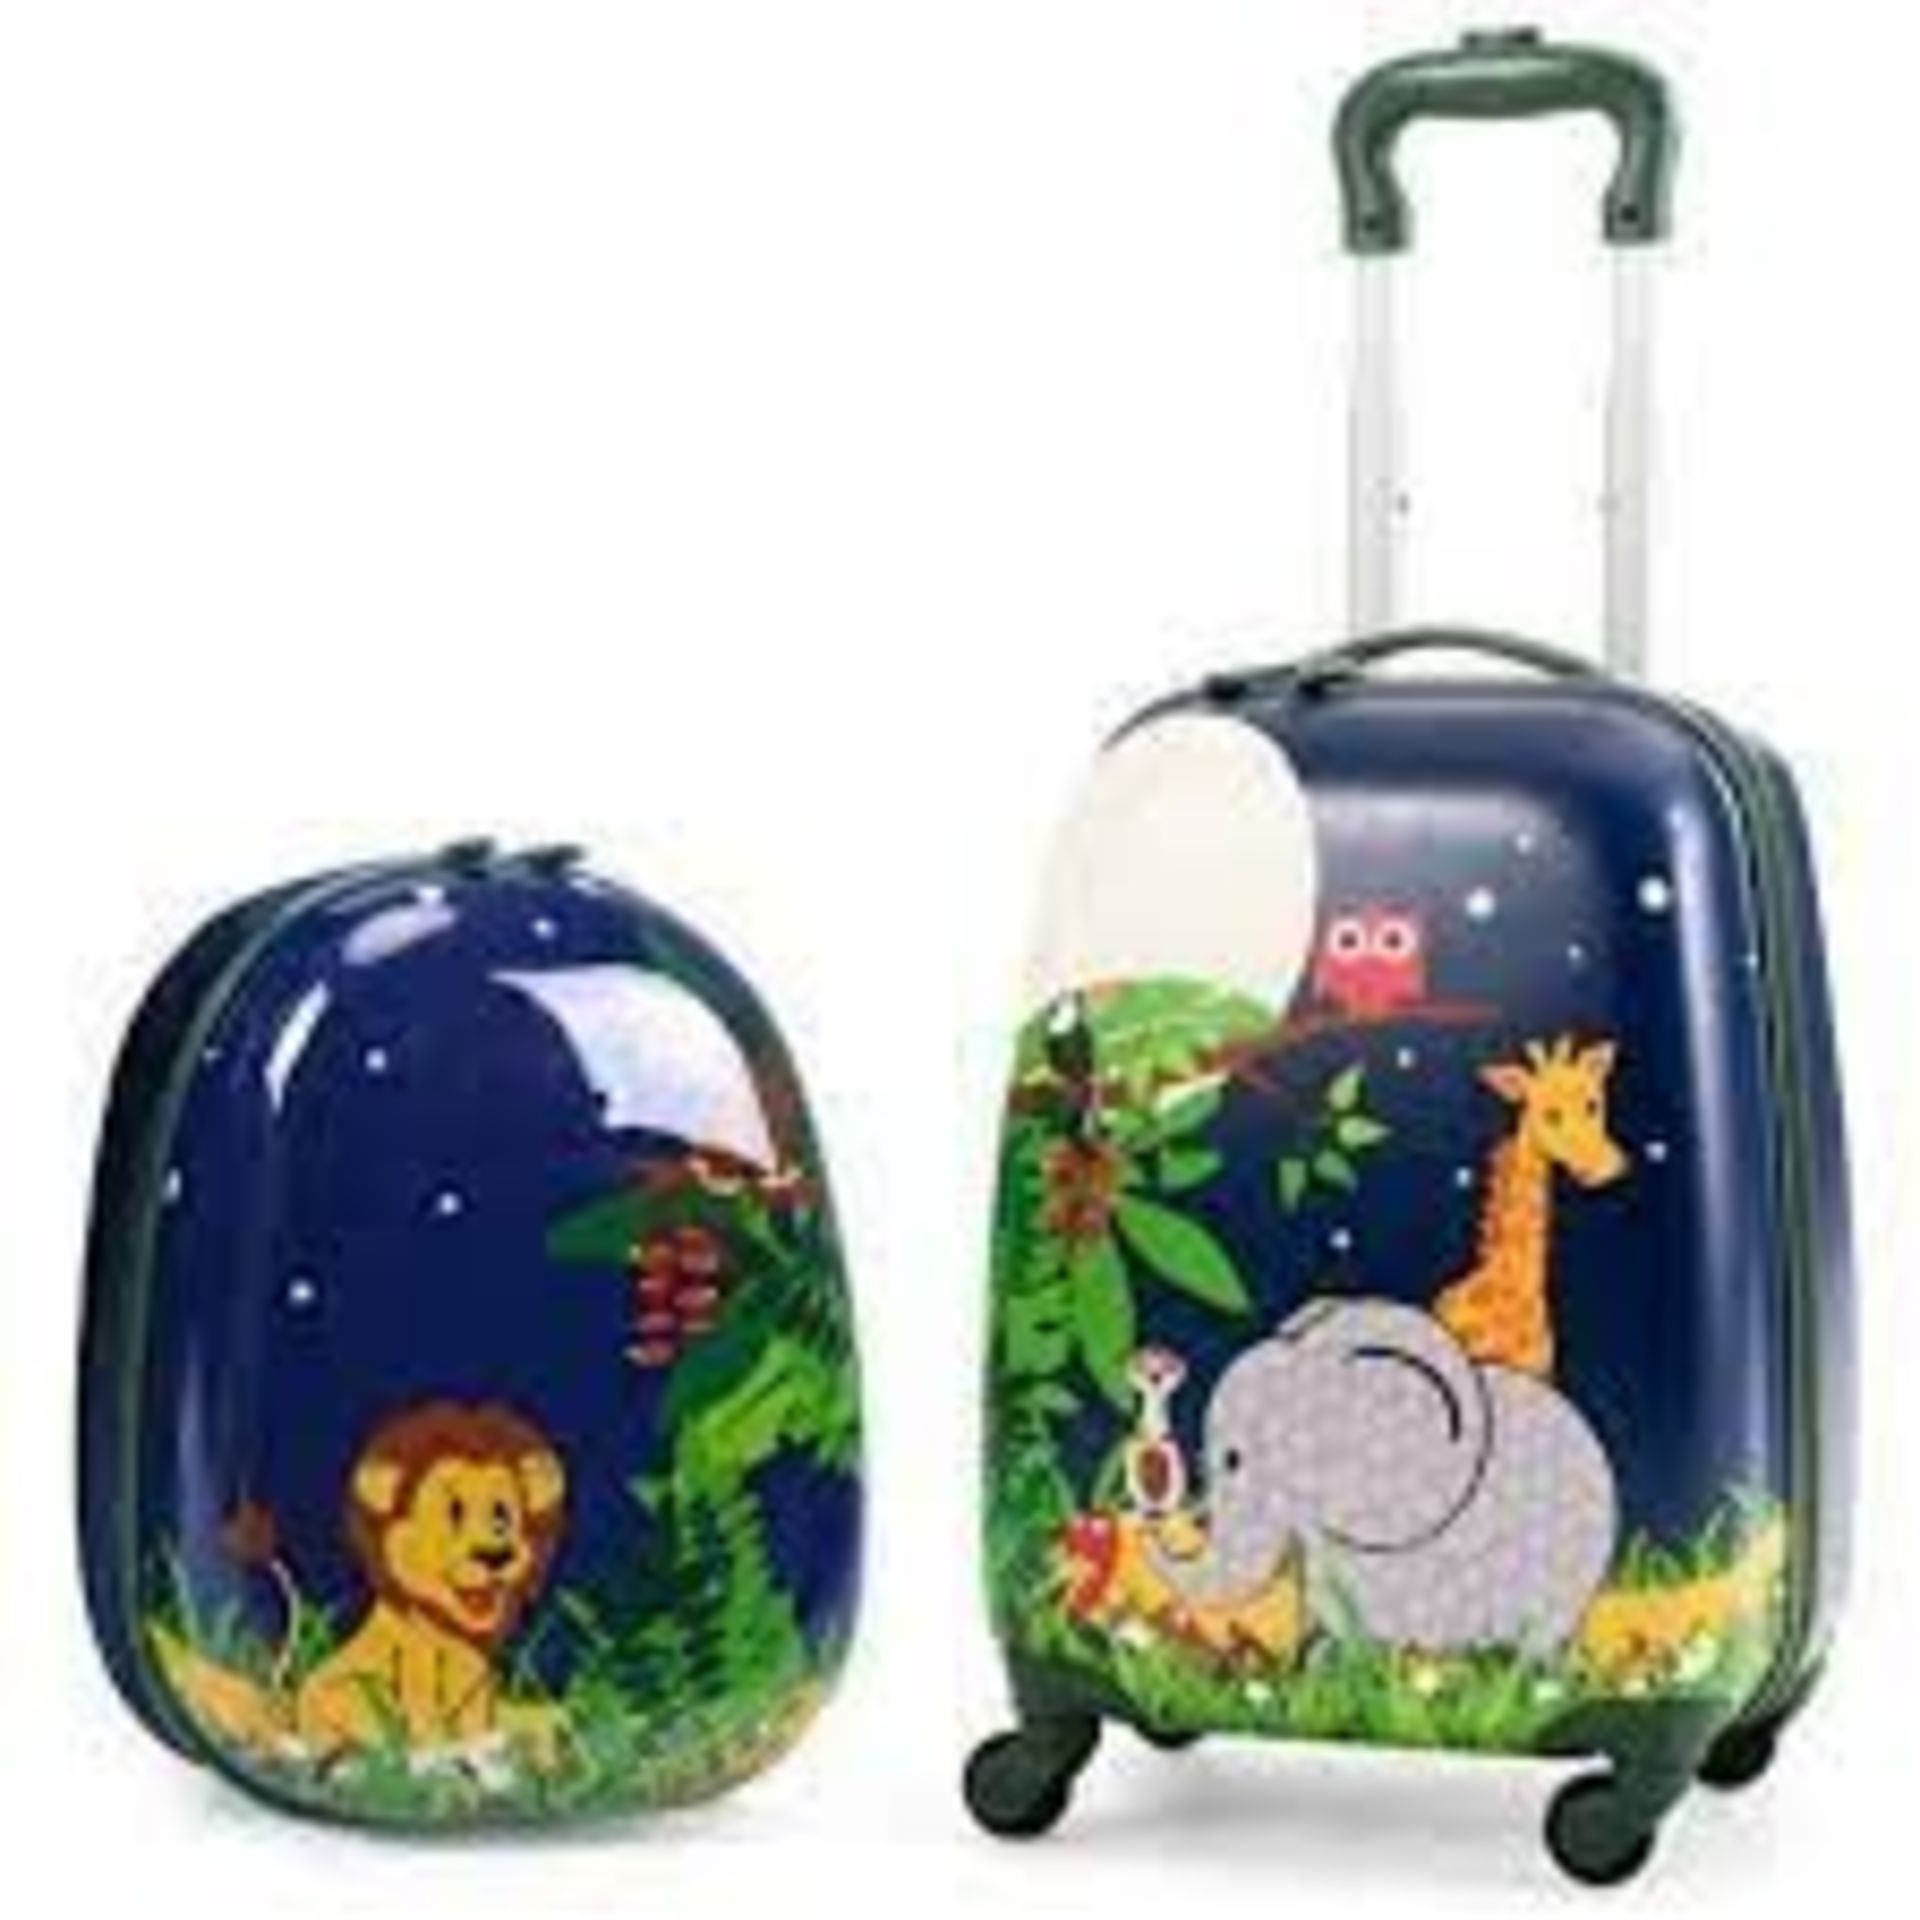 2 Pieces Kids Luggage Set with Carry-on Suitcase and Backpack - R14.5. Are you looking for a dream